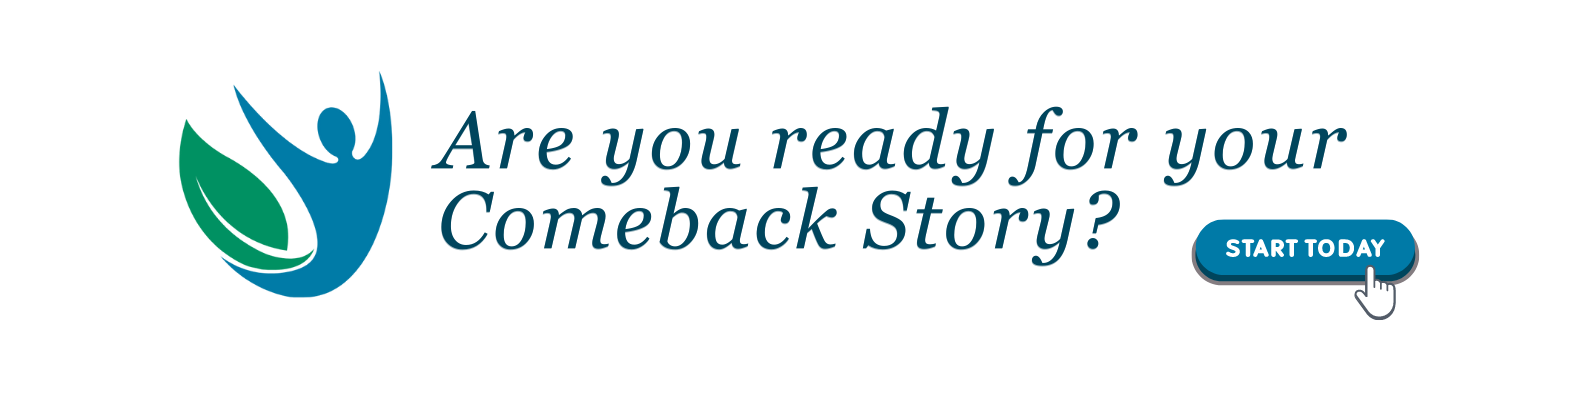 Shawn Rumble Recovery Services Logo - Get Ready for Your Comeback Story!